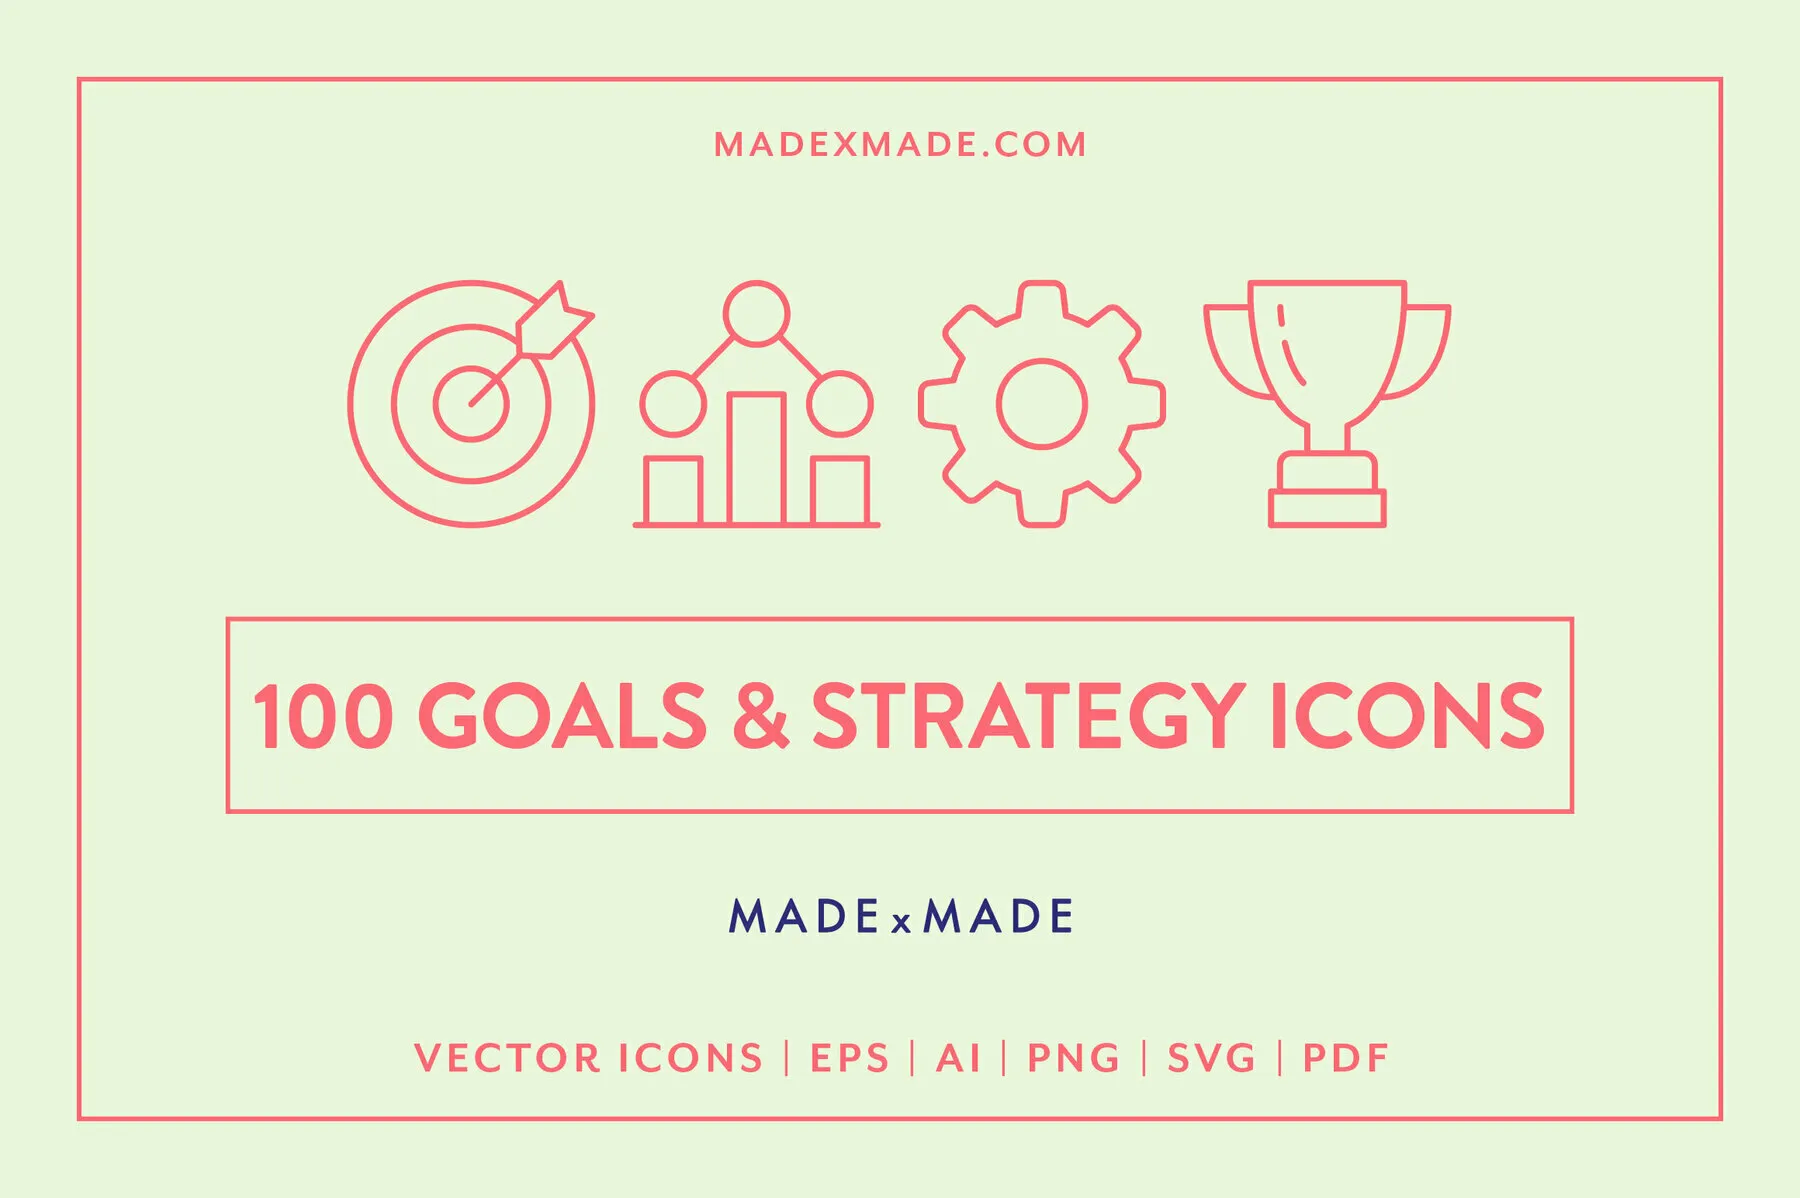 Goals & Strategy Icons